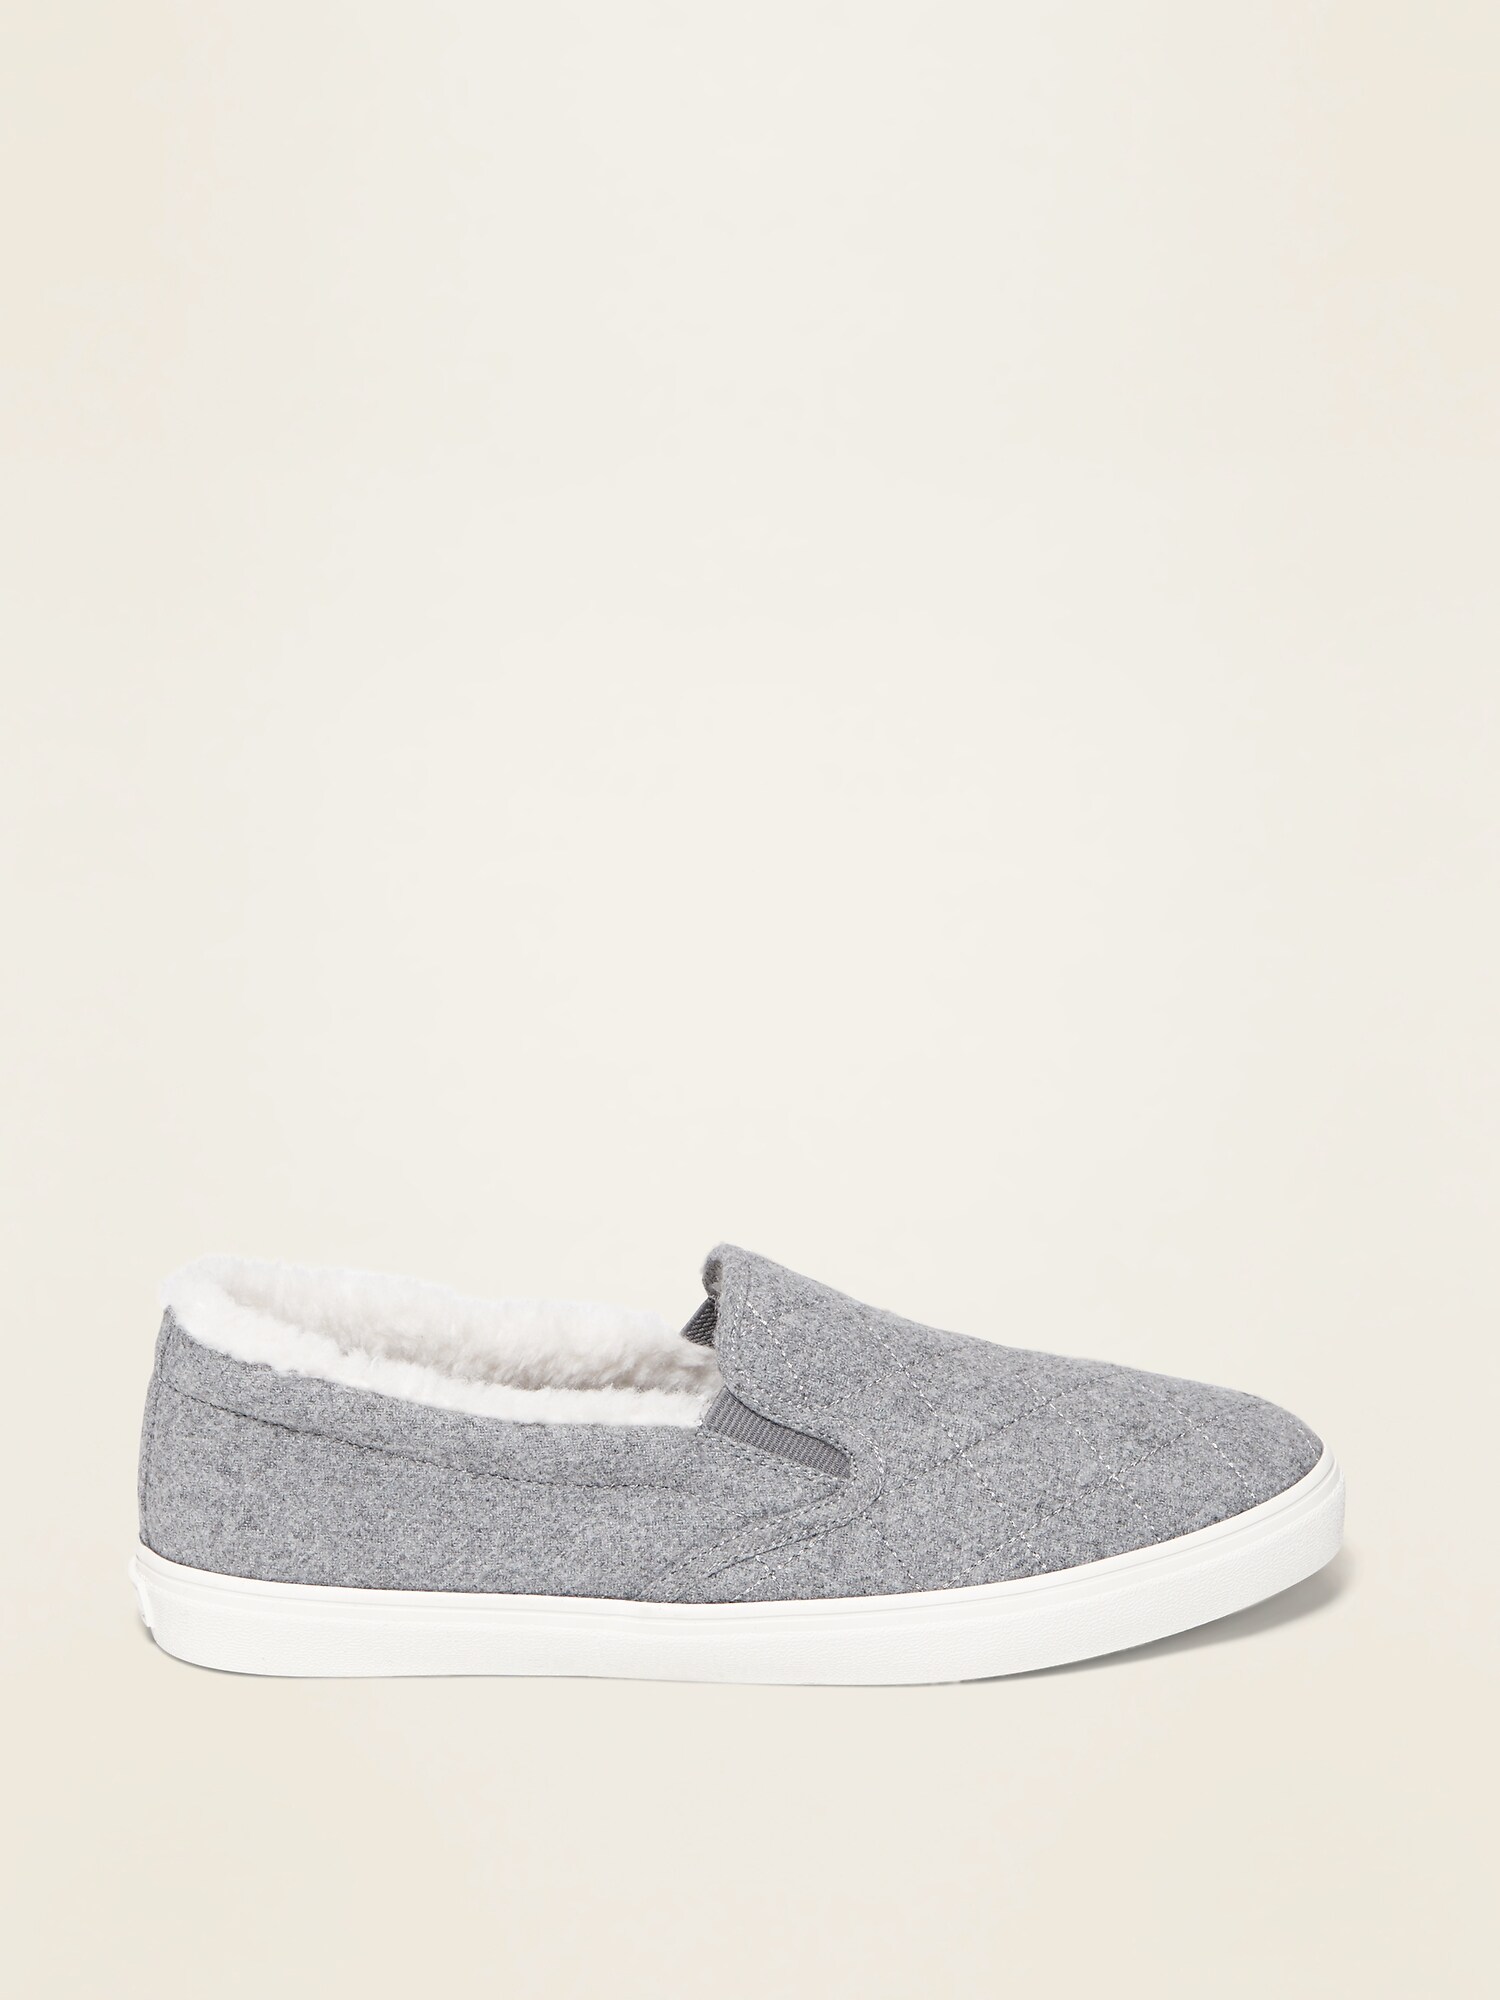 Sherpa-Lined Slip-Ons for Women | Old Navy